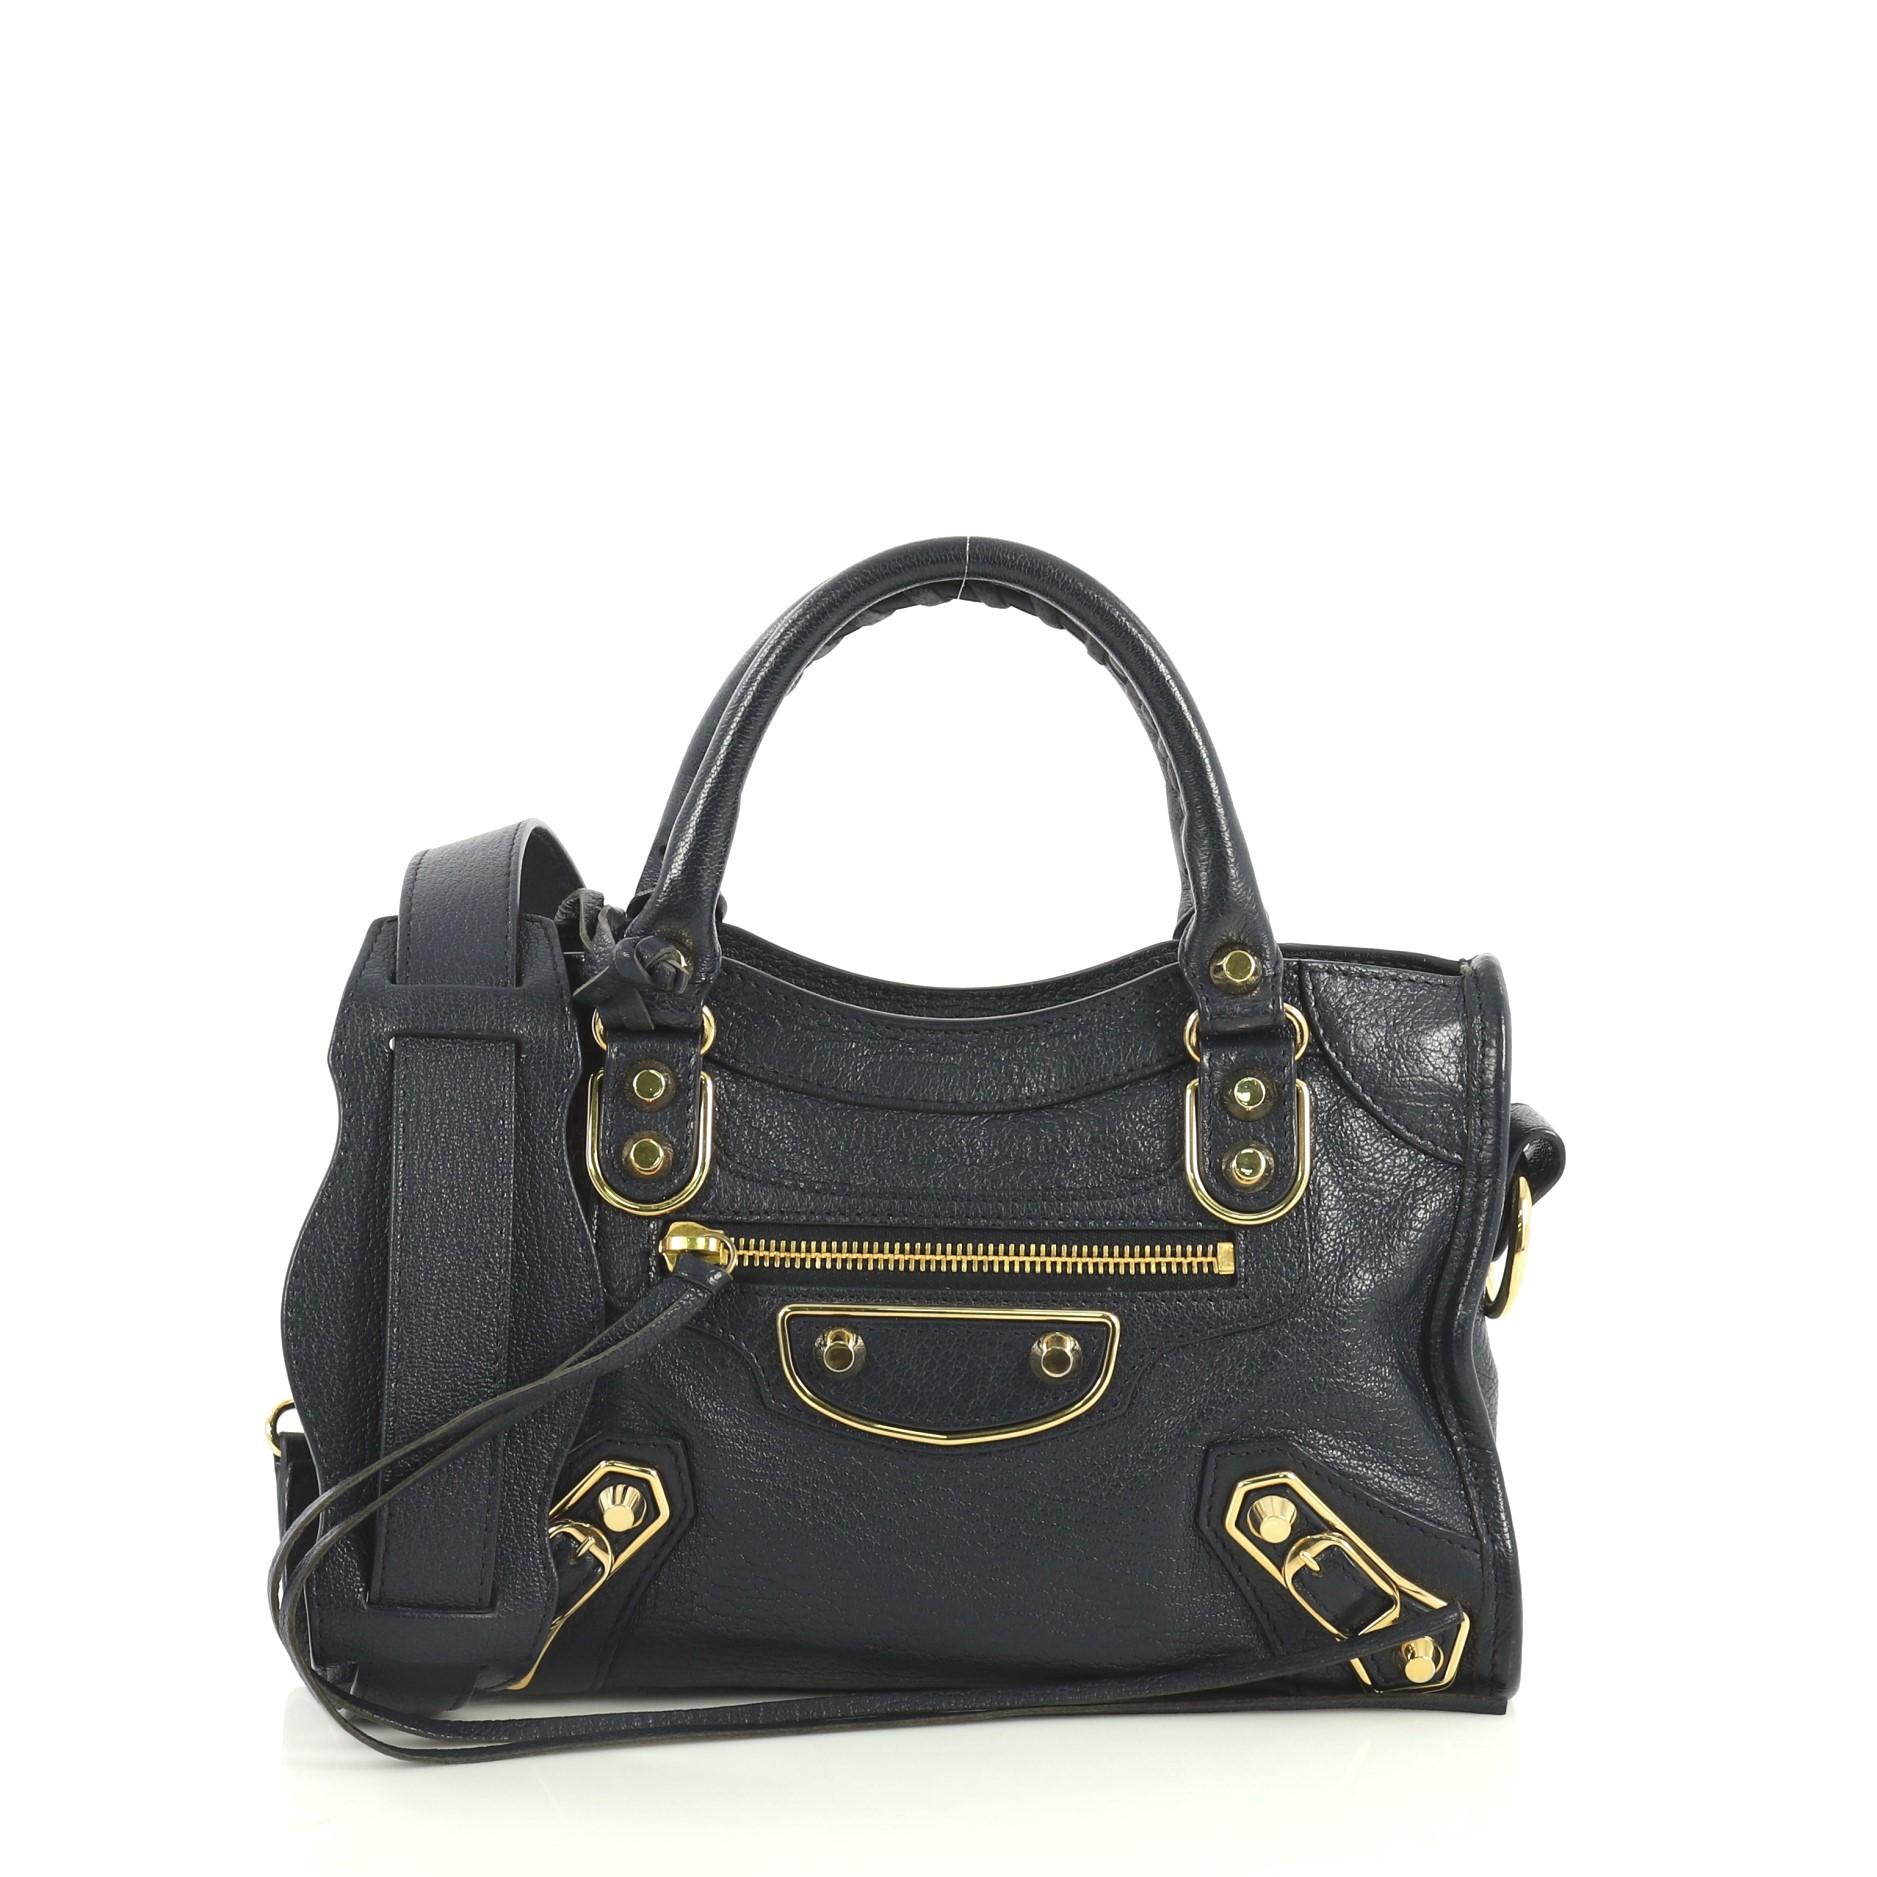 This Balenciaga City Classic Metallic Edge Bag Leather Mini, crafted from blue leather, features dual braided woven handles, studs and buckle details, front zip pocket, and gold-tone hardware. Its top zip closure opens to a black fabric interior